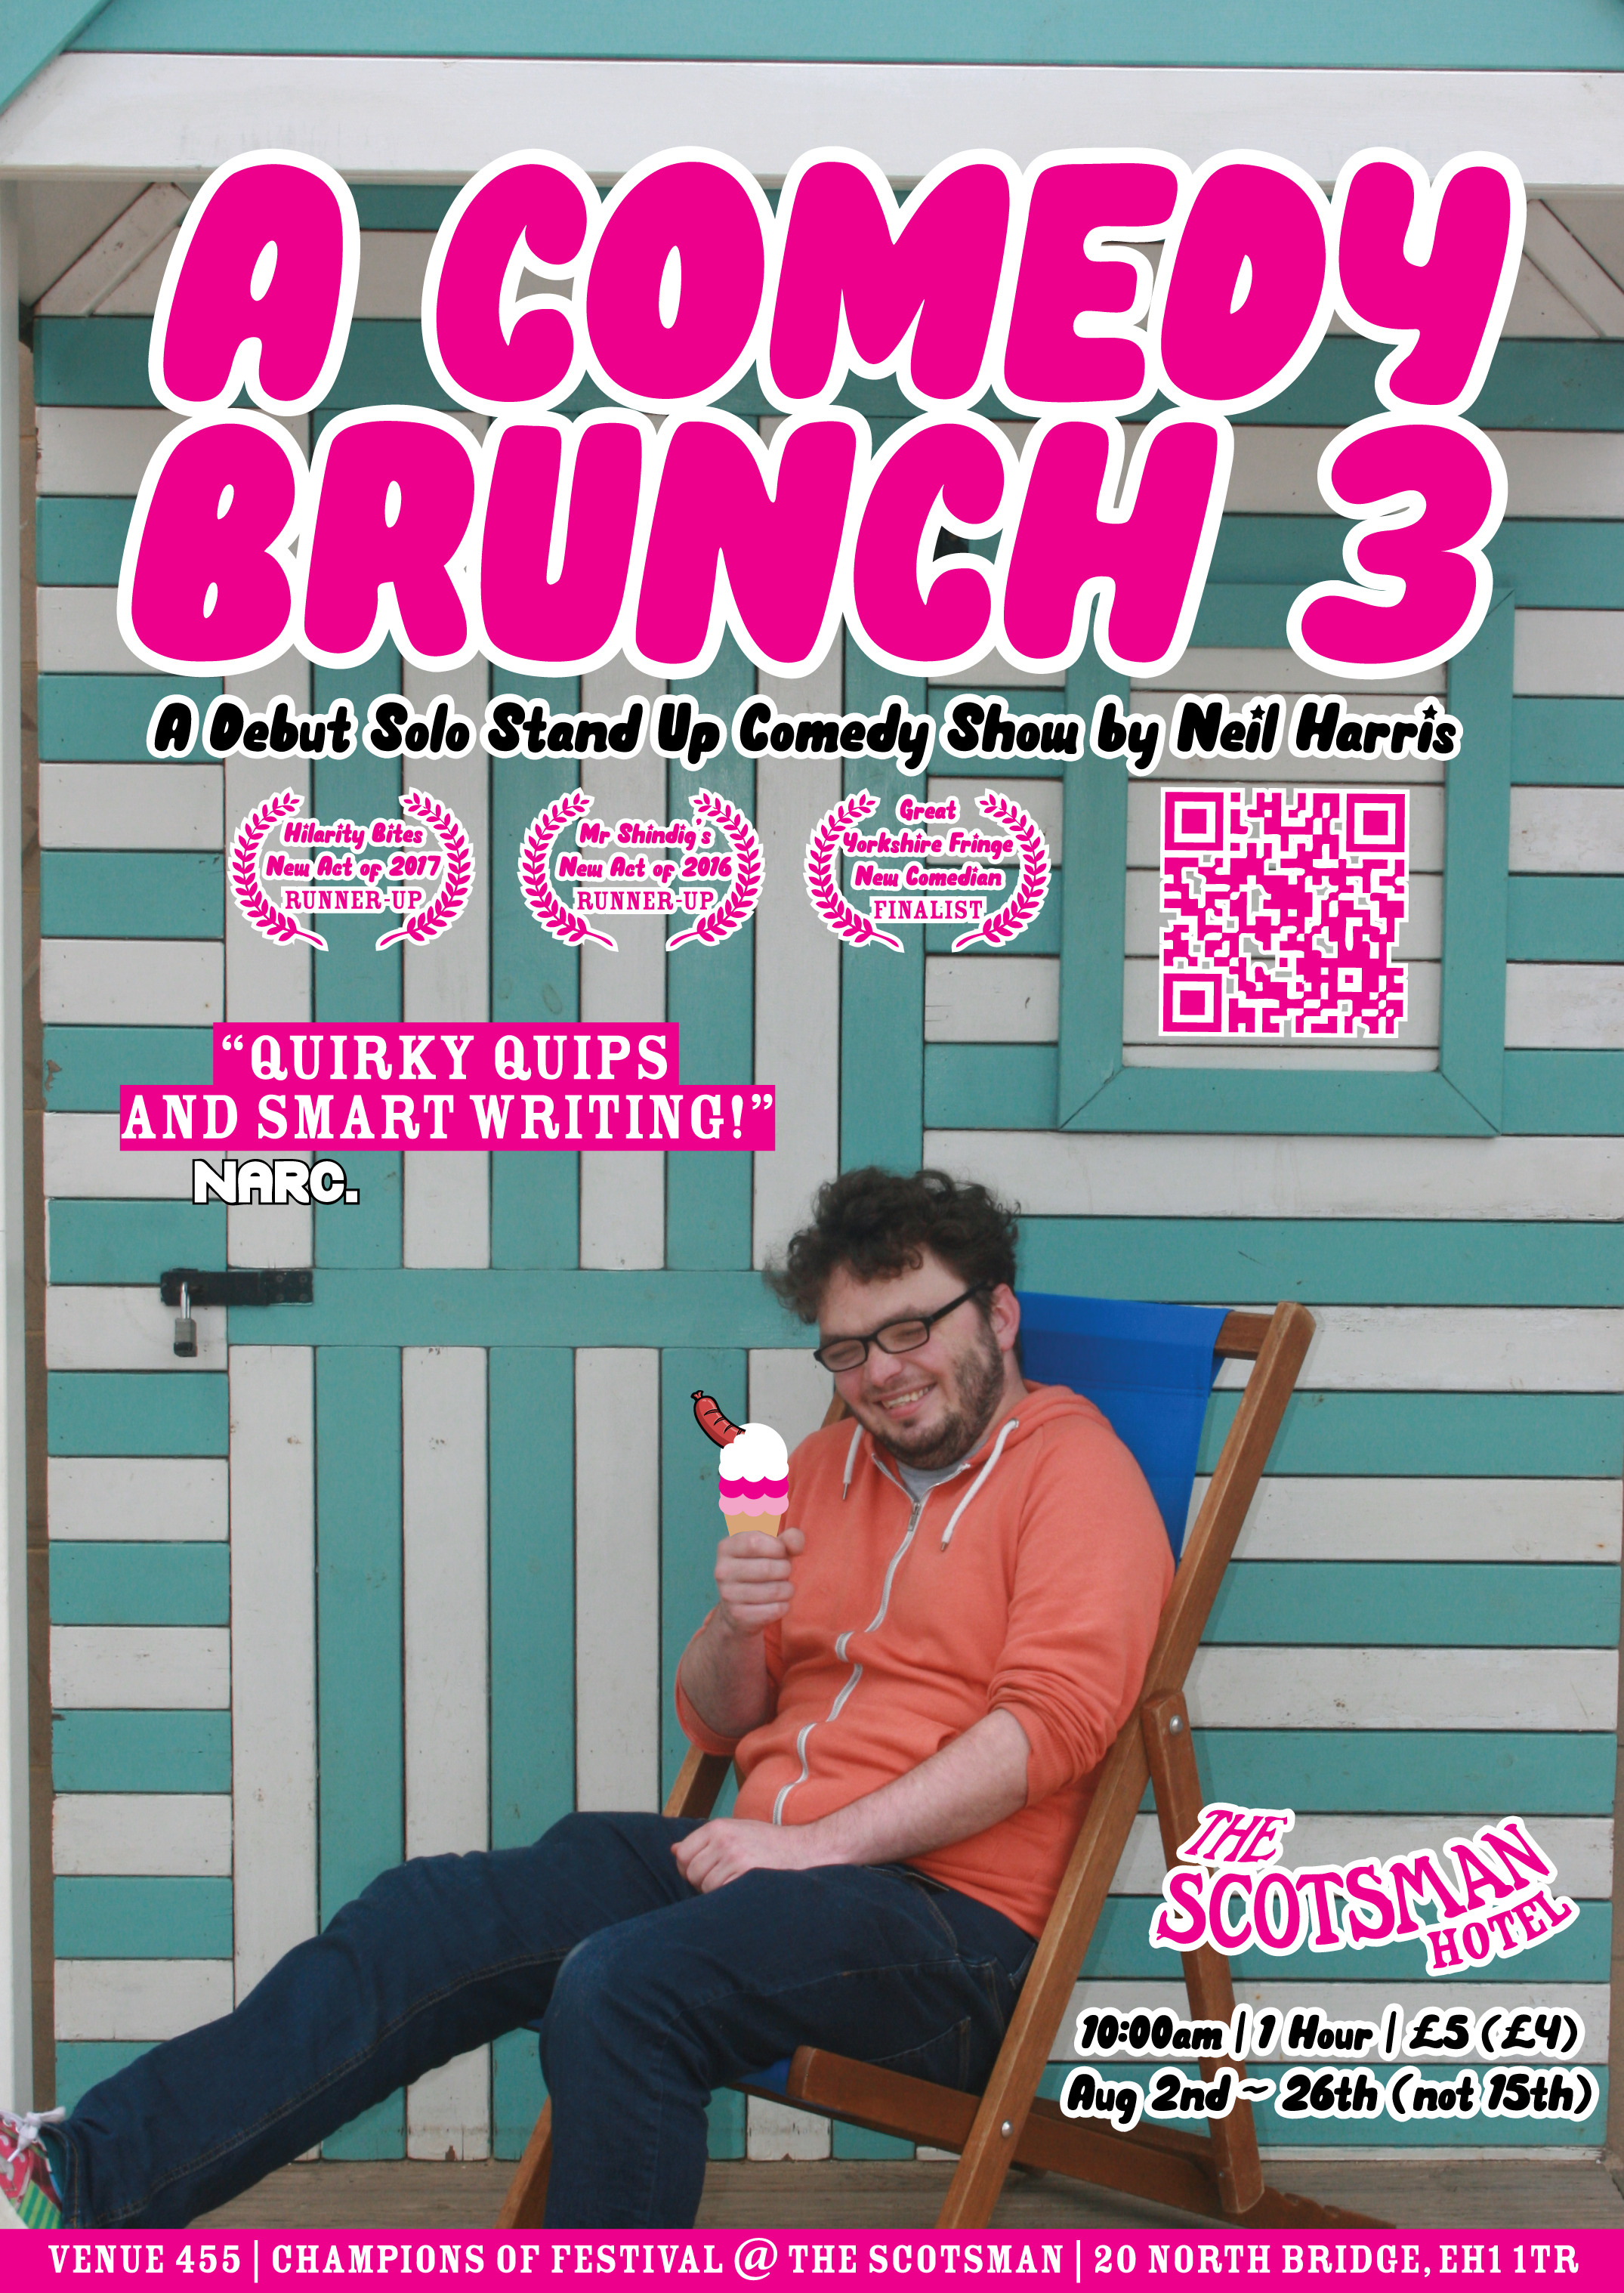 The poster for A Comedy Brunch 3